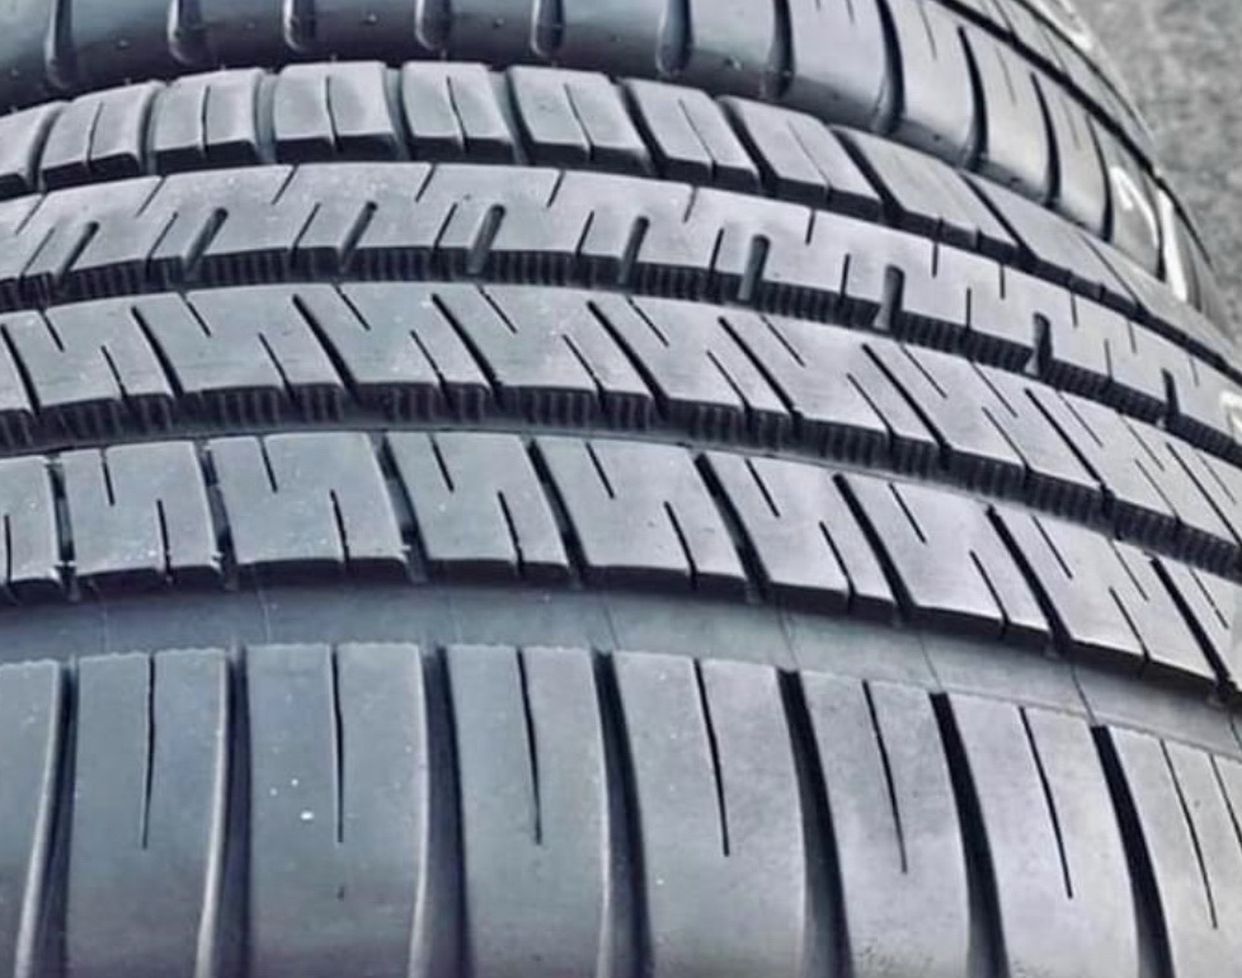 245/40/18 Michelin A/S3+ 2 Tires